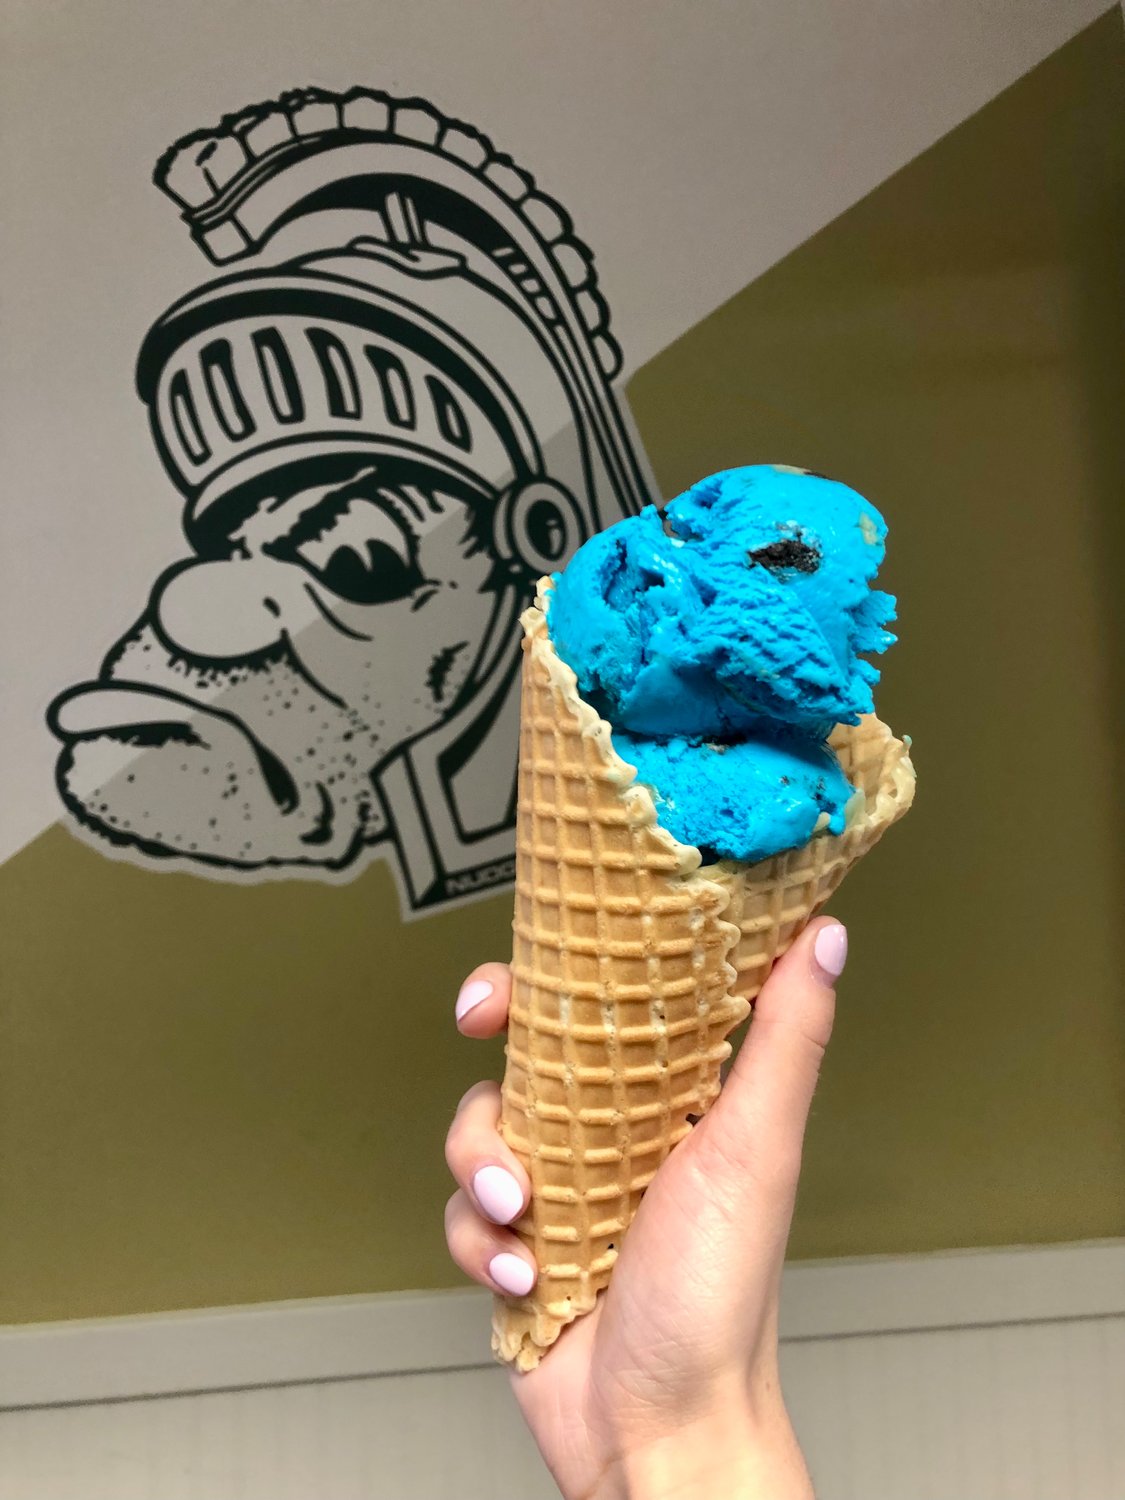 The Cookie Monster ice cream from the Michigan State University Dairy Store.